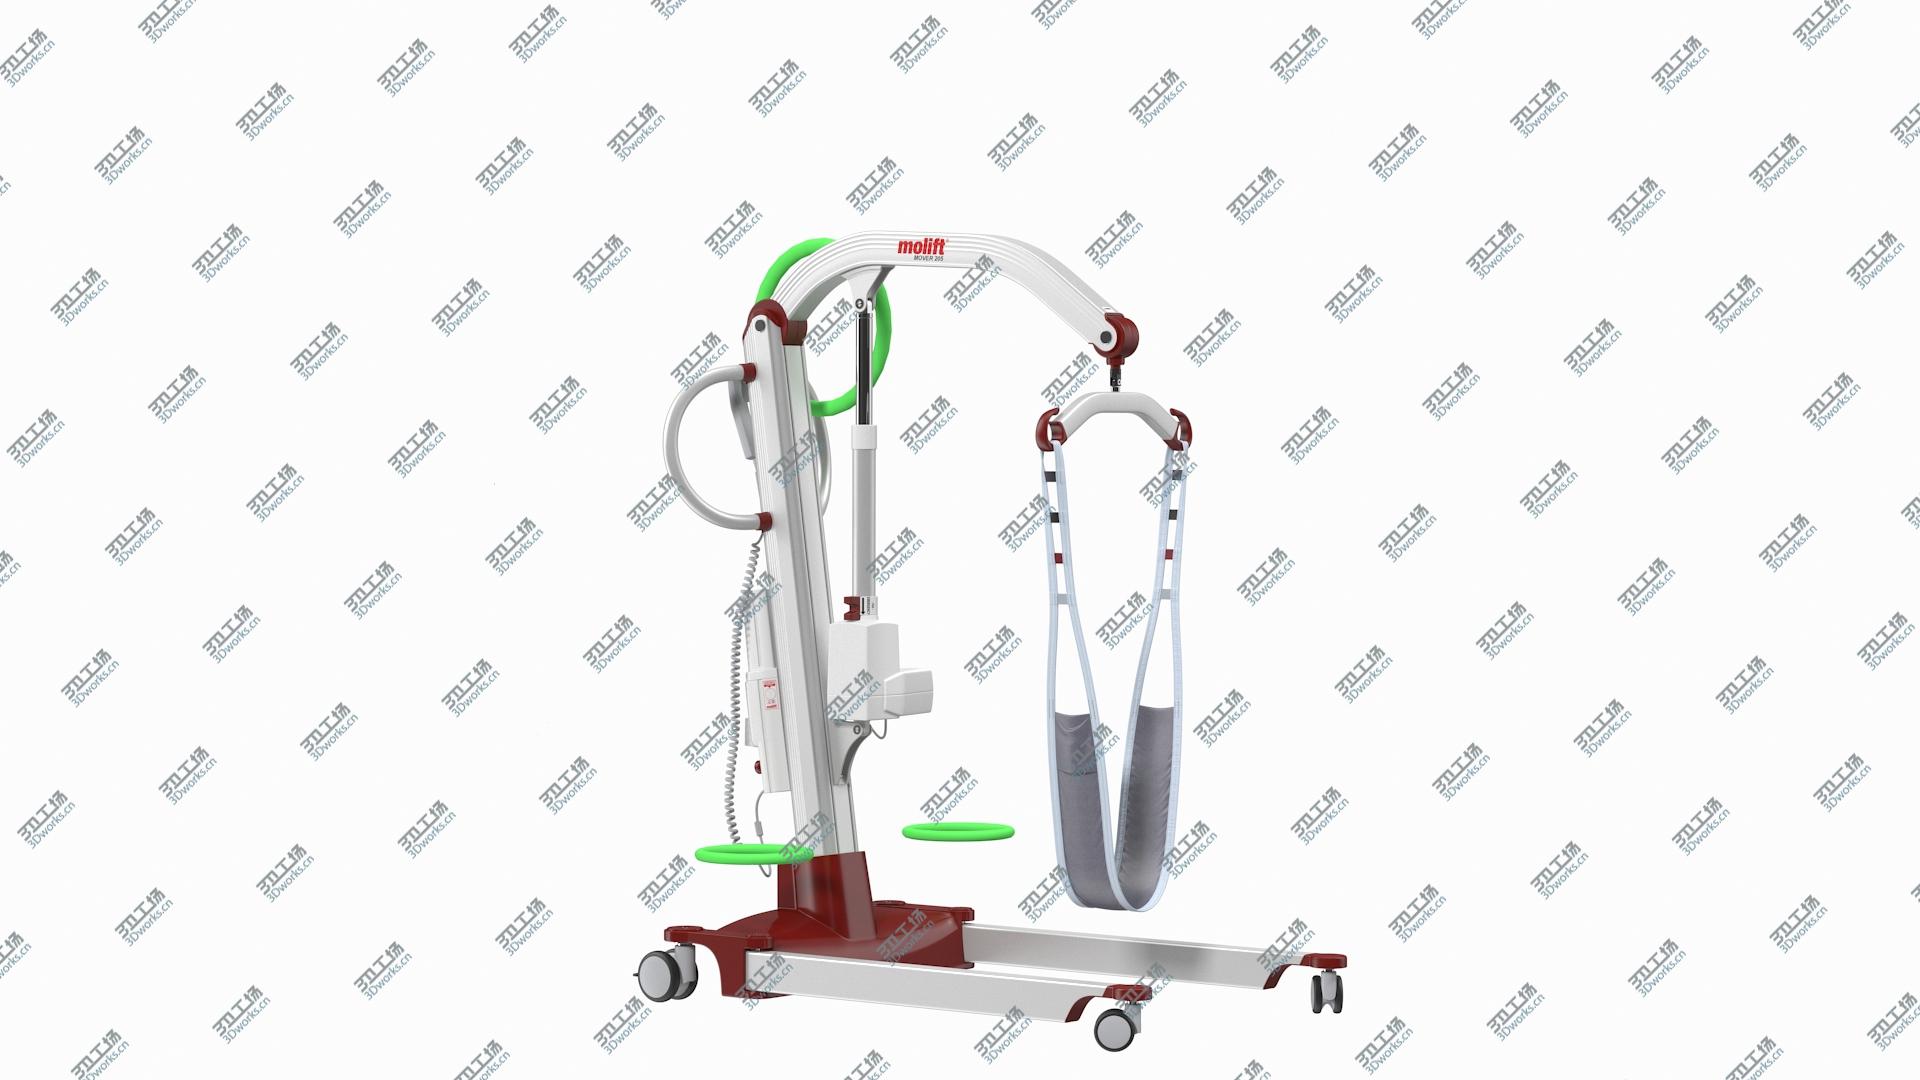 images/goods_img/202104091/Patient Lift Molift Mover 205 with FlexiStrap Rigged 3D model/3.jpg